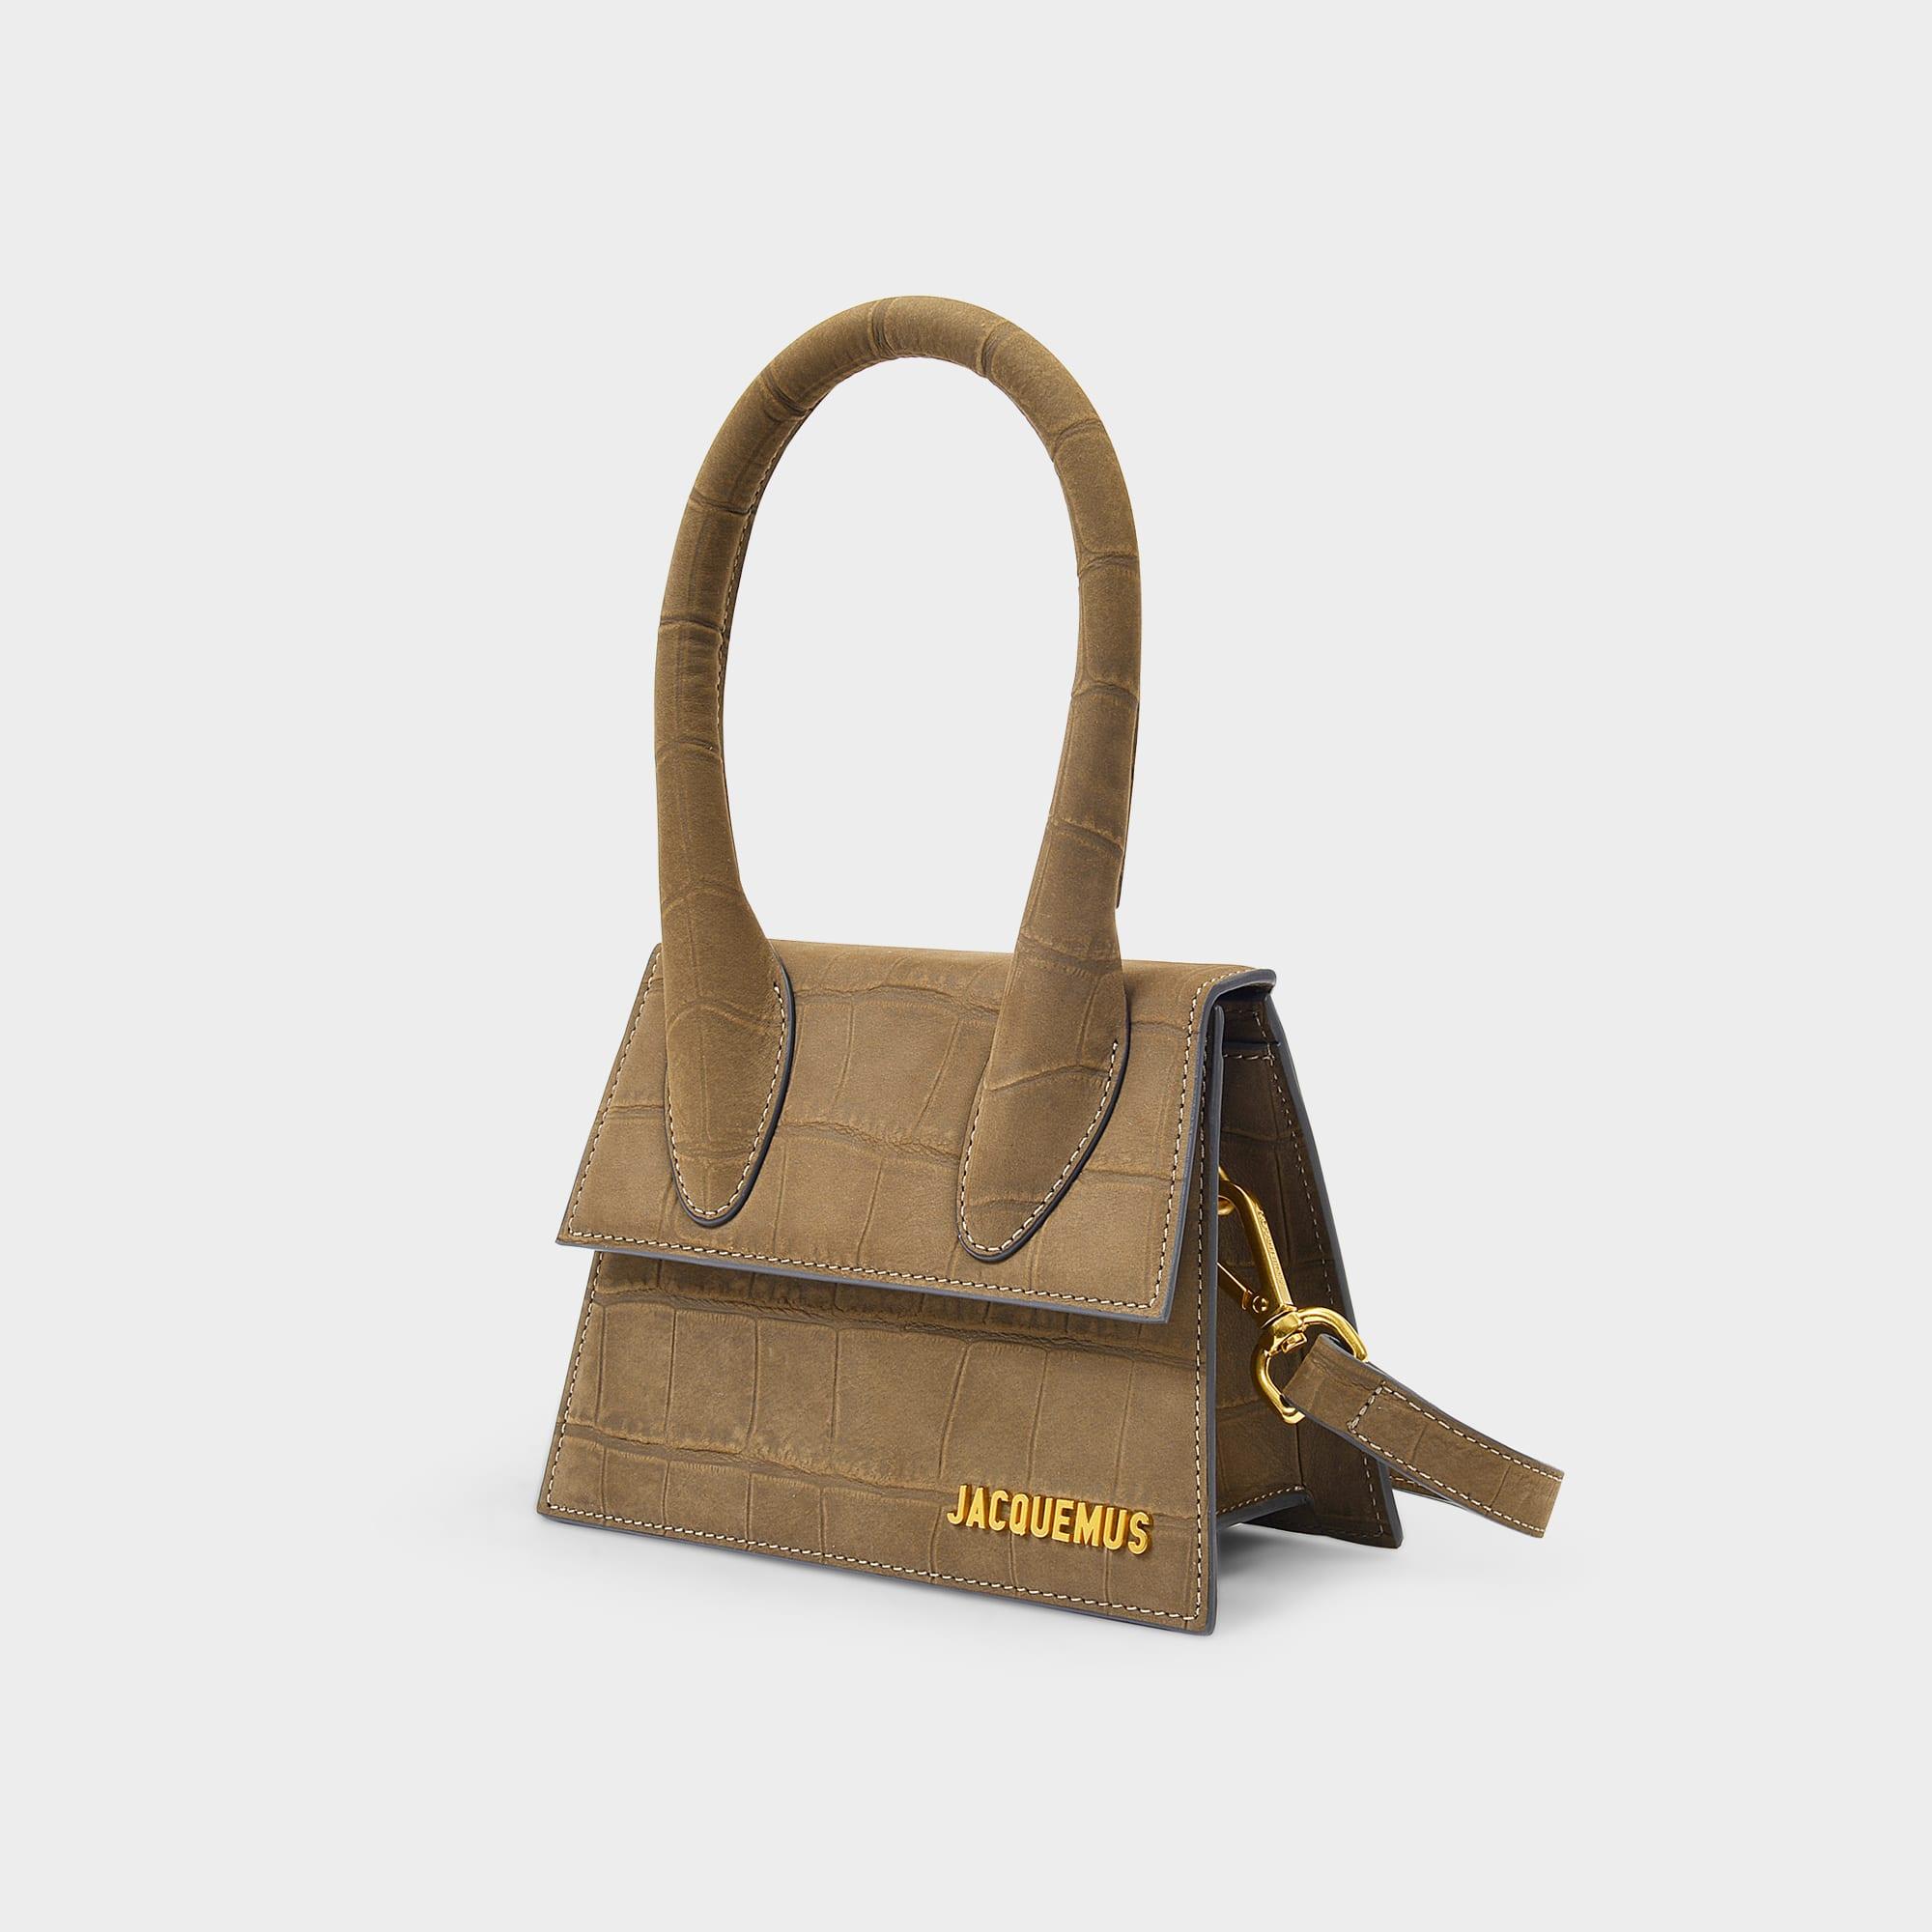 Jacquemus Handbag Le Chiquito Moyen In Beige Nubuck Leather in Natural ...